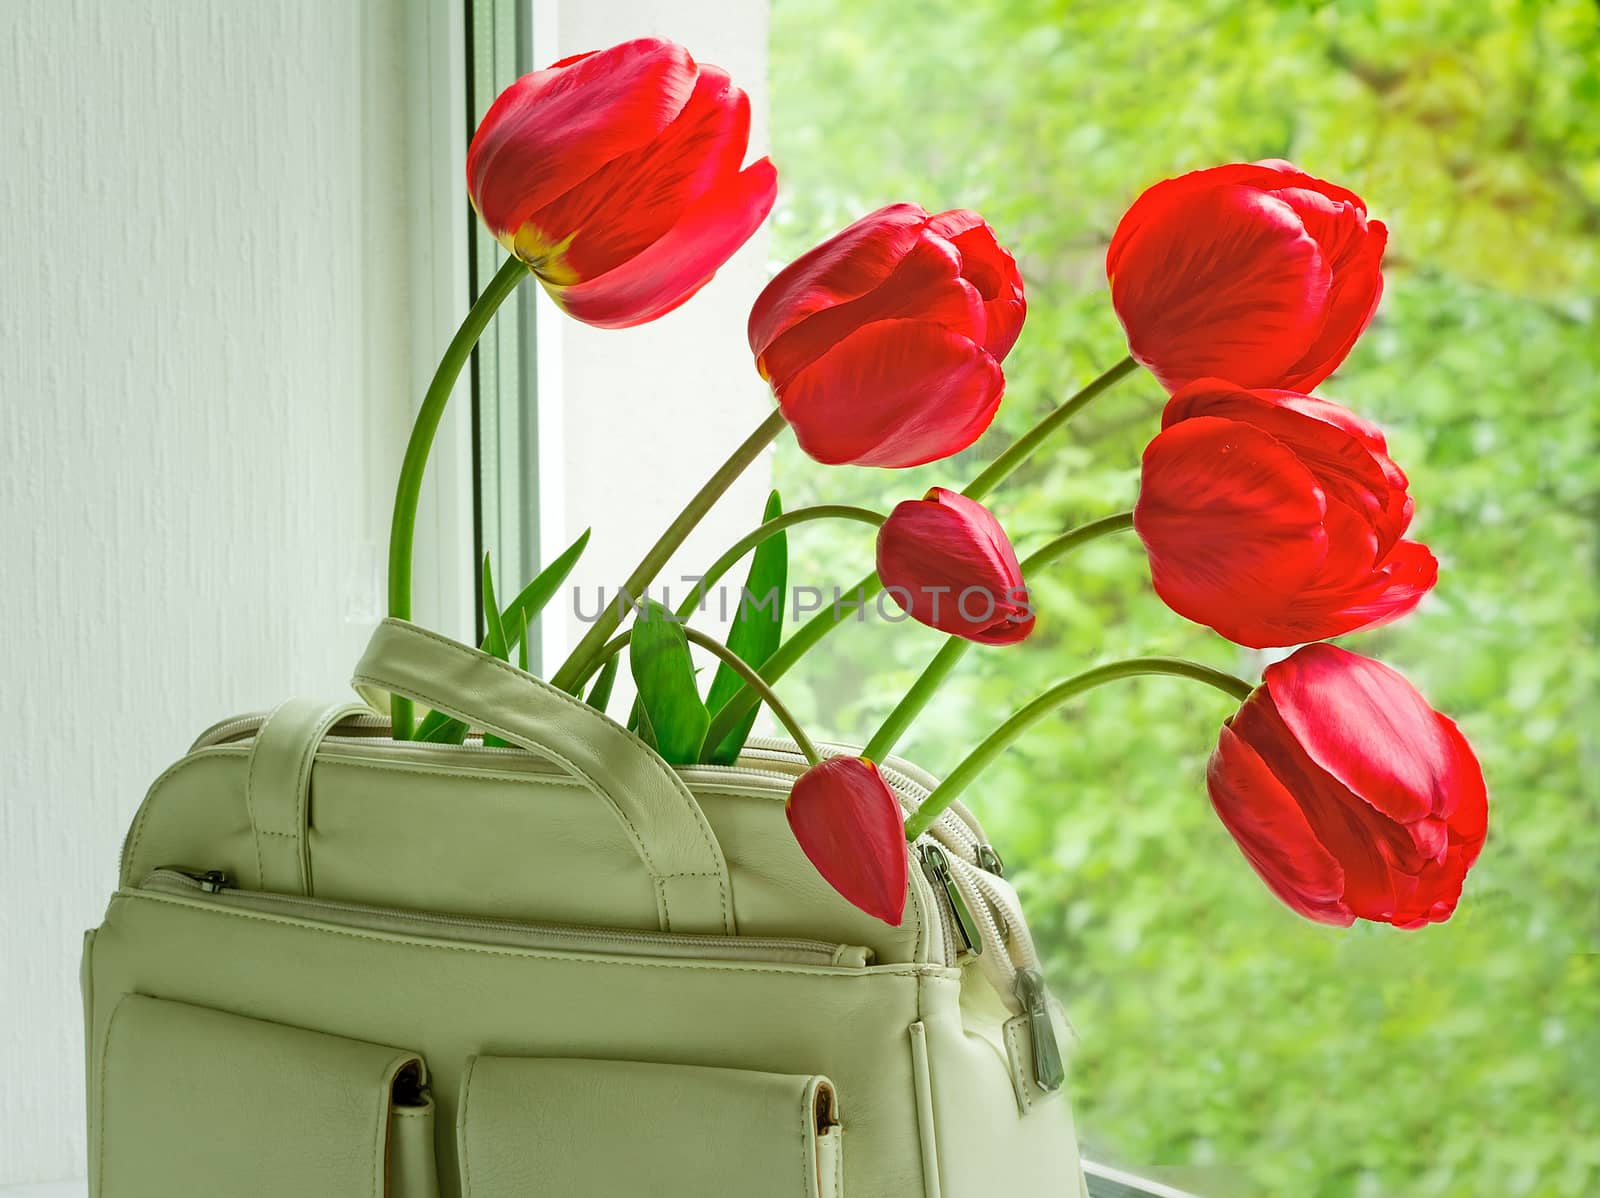 
Bright red flowers of tulips and light leather women bag on a window window sill.